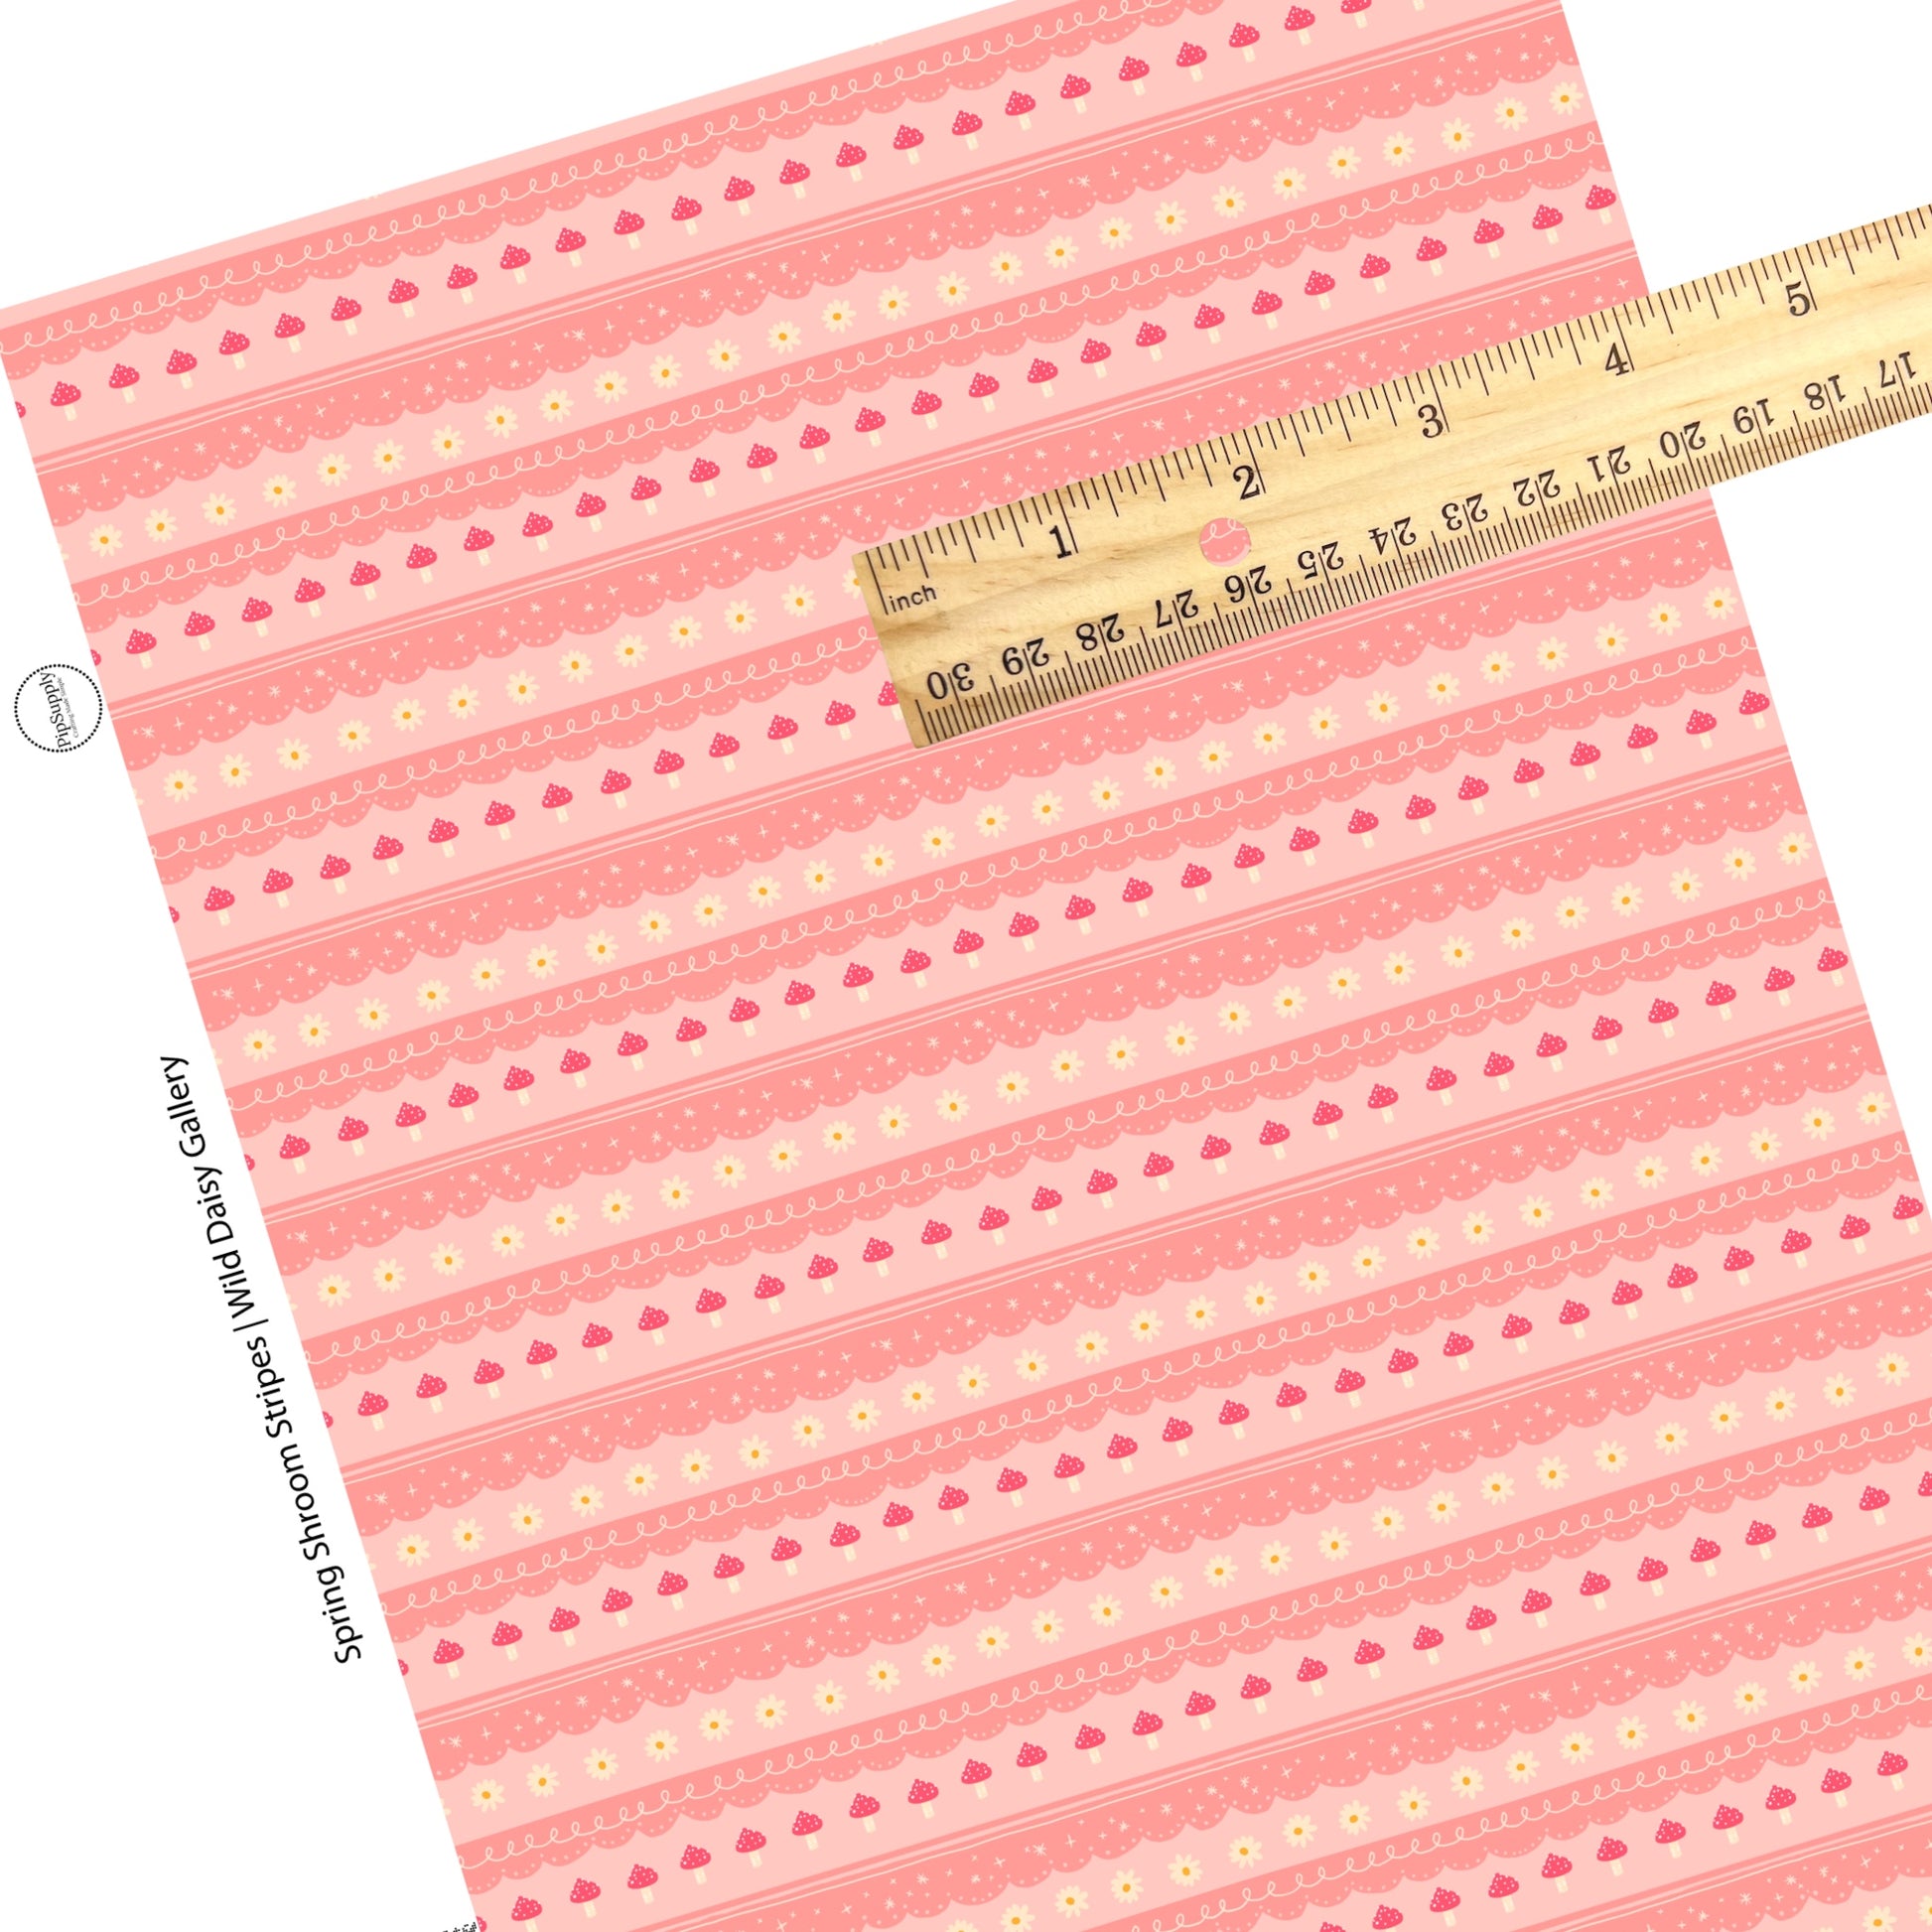 These spring stripes pattern themed faux leather sheets contain the following design elements: colorful flowers and mushrooms between stripes on pink. Our CPSIA compliant faux leather sheets or rolls can be used for all types of crafting projects.